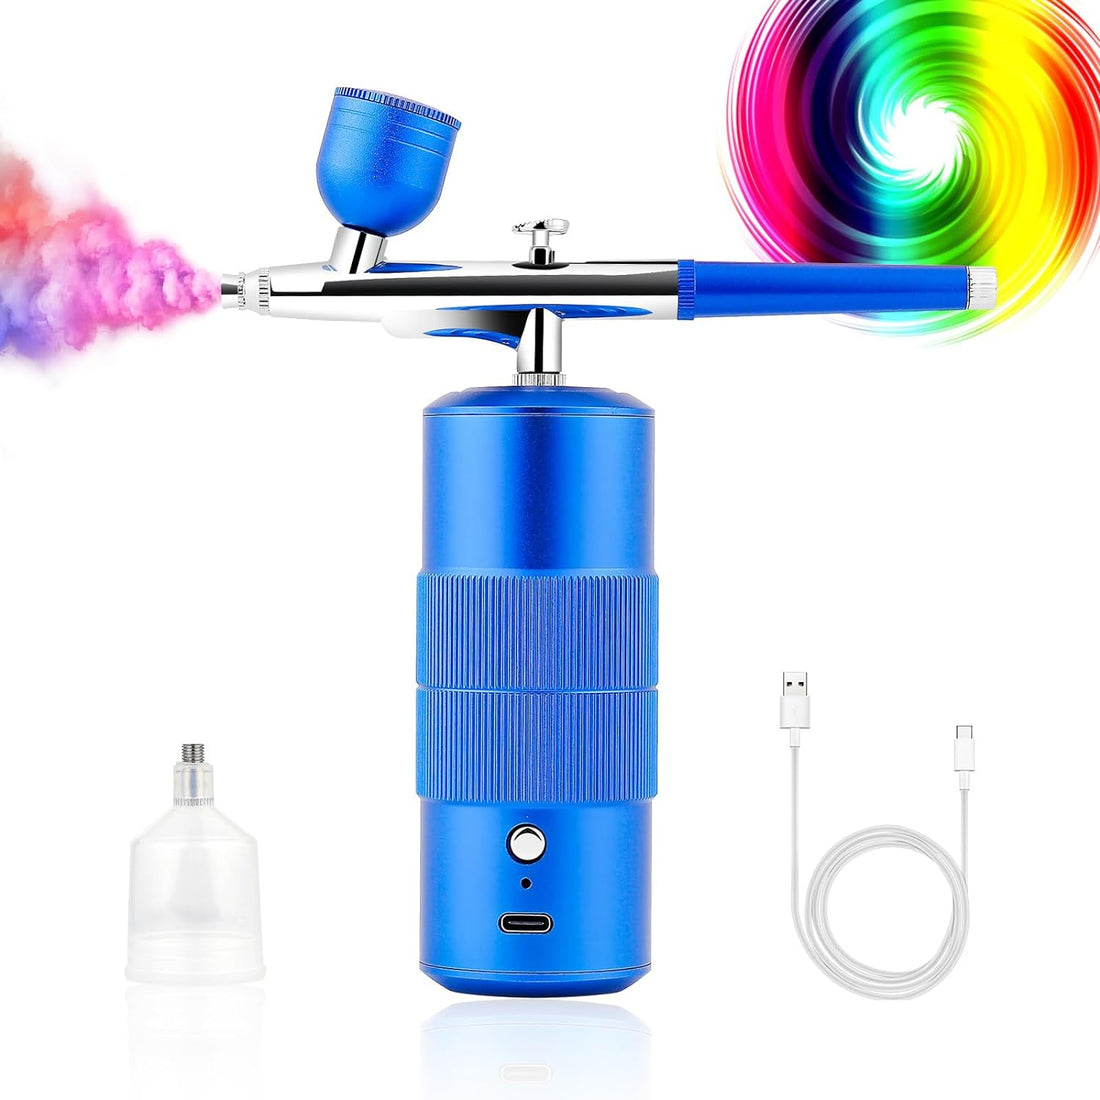 LIARTY Airbrush Kit Machine, Rechargeable Handheld Airbrush, Professional Cordless Air Brush Portable Wireless for Nail Art, Makeup, Barber, Cake Decor, Painting (Blue)